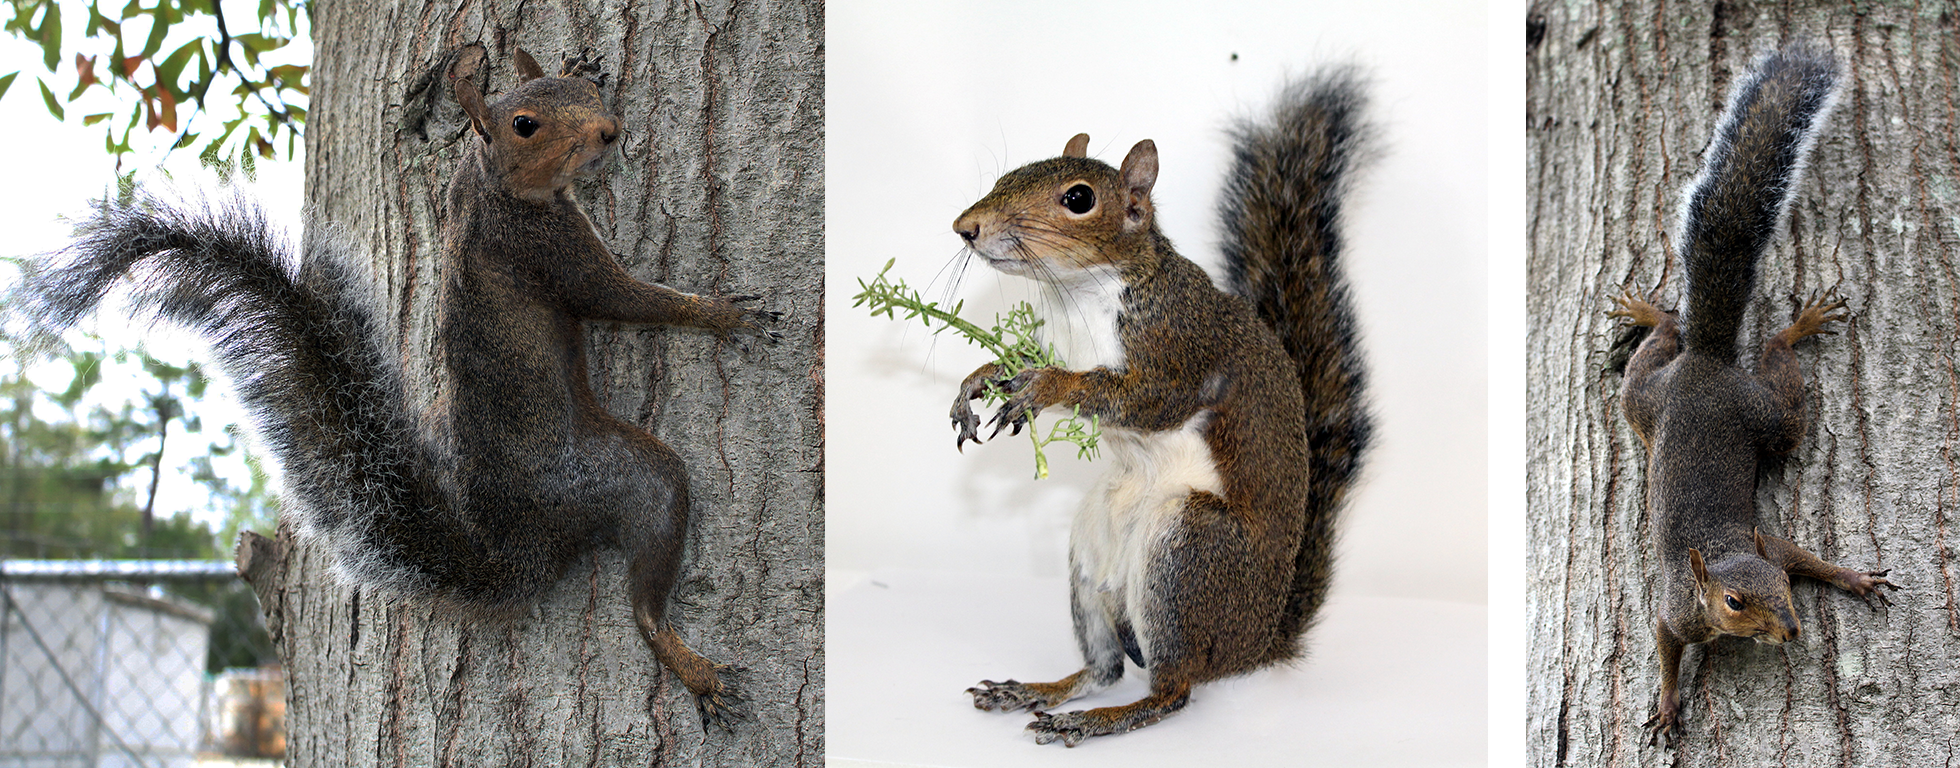 Collage of the kit squirrels